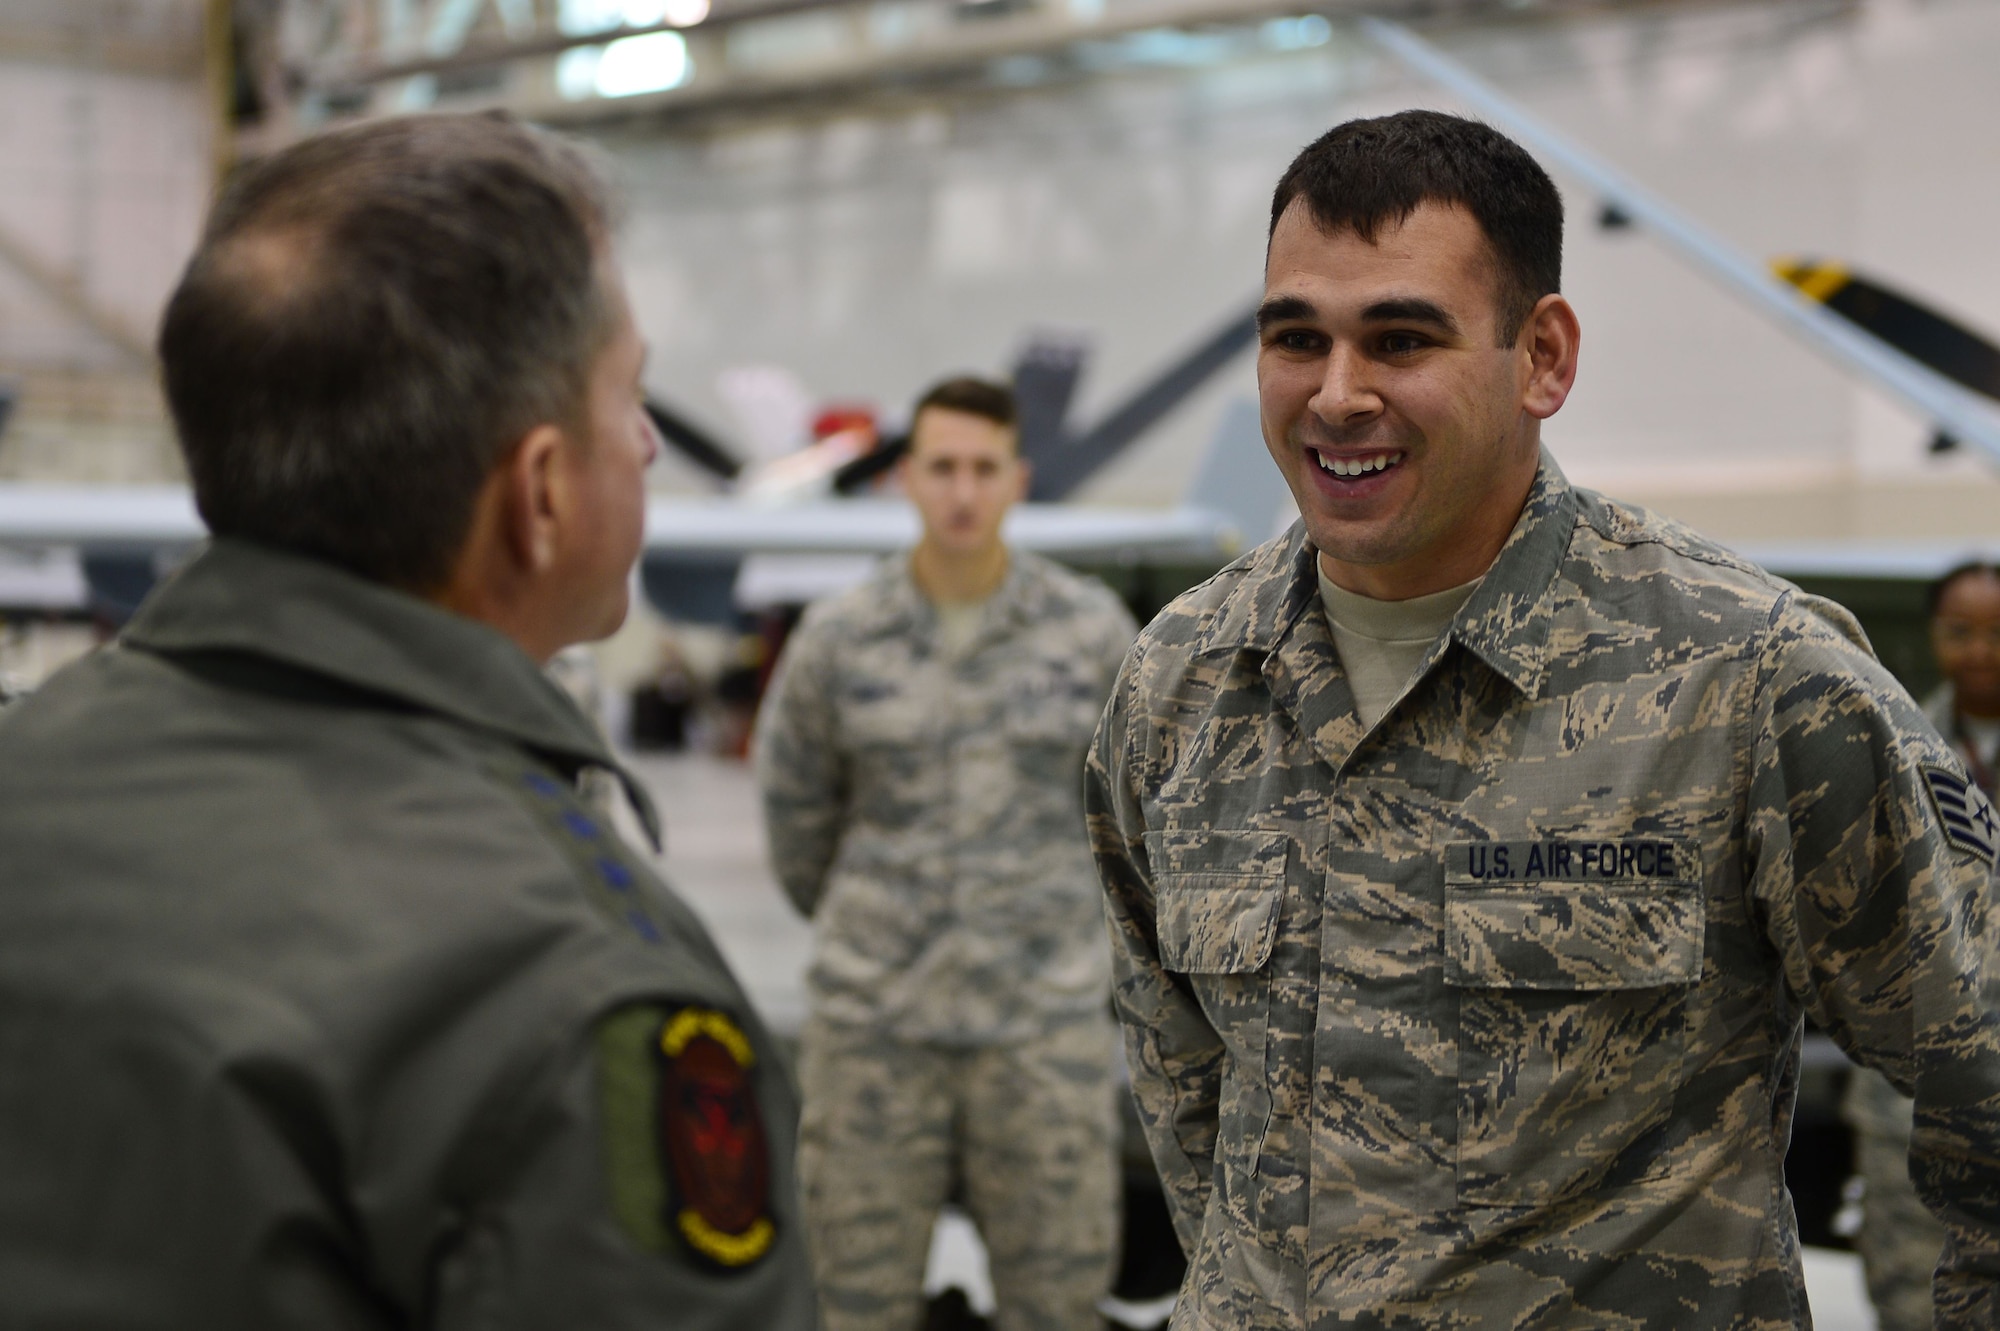 Air Force Chief of Staff Gen. David L. Goldfein shares a laugh with Staff Sgt. Steven, 432nd Aircraft Maintenance Squadron aircraft technician, Jan. 9, 2017, at Creech Air Force Base, Nev. Goldfein visited to see operations firsthand and discuss the future of the Remotely Piloted Aircraft enterprise. (U.S. Air Force photo/Airman 1st Class Haley Stevens)